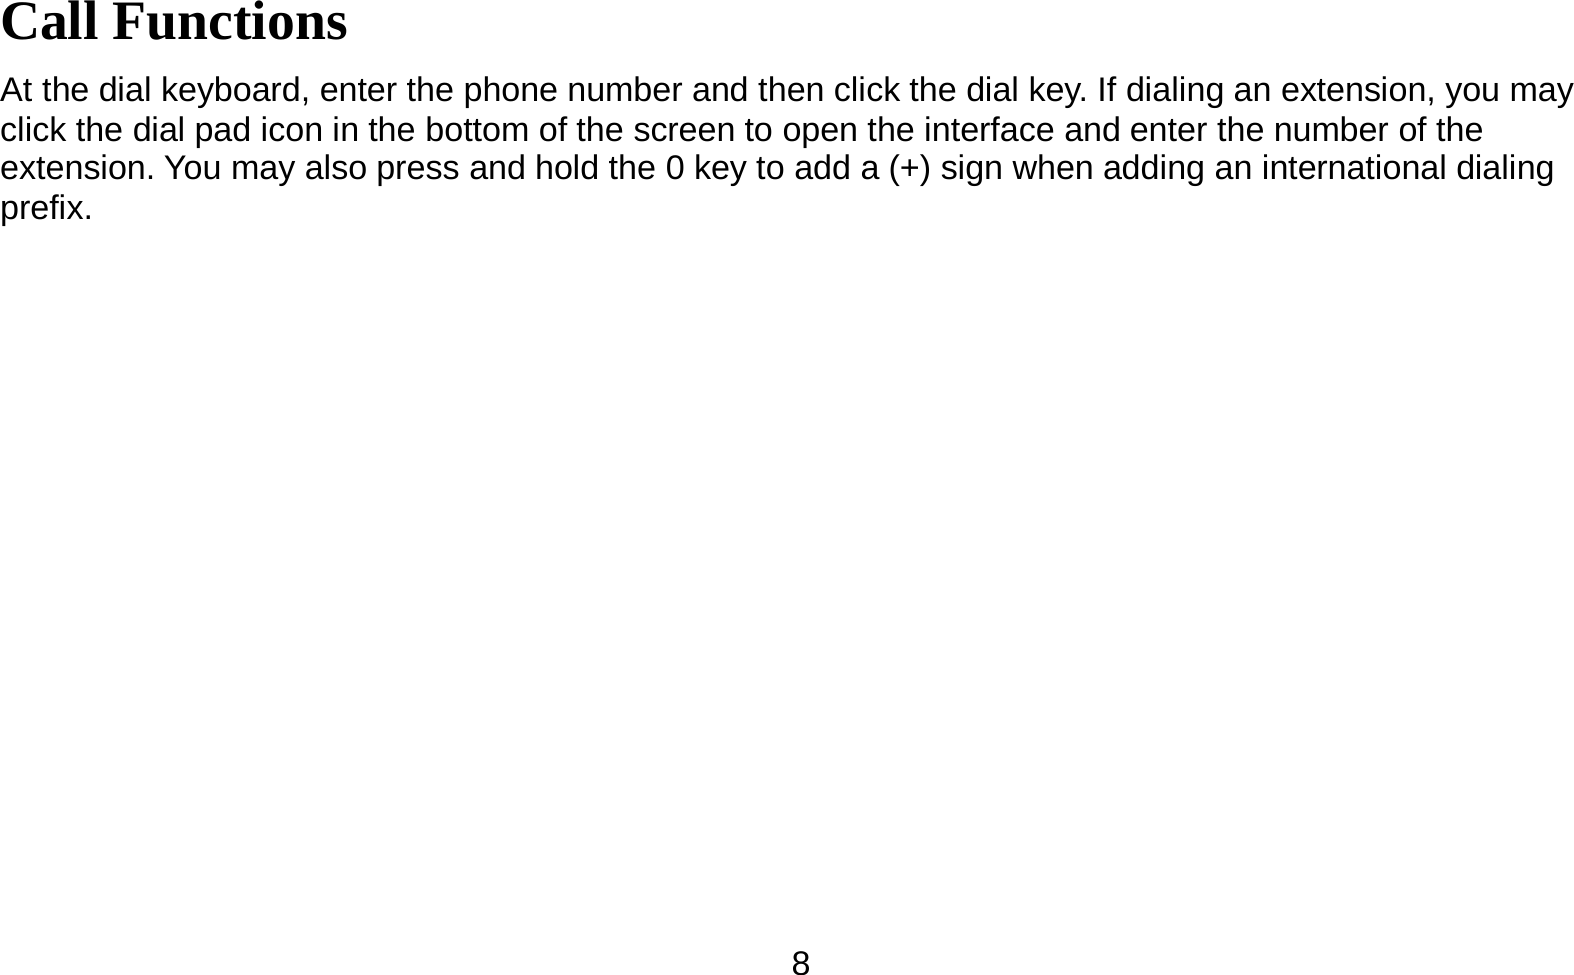   8Call Functions                                        At the dial keyboard, enter the phone number and then click the dial key. If dialing an extension, you may click the dial pad icon in the bottom of the screen to open the interface and enter the number of the extension. You may also press and hold the 0 key to add a (+) sign when adding an international dialing prefix.  